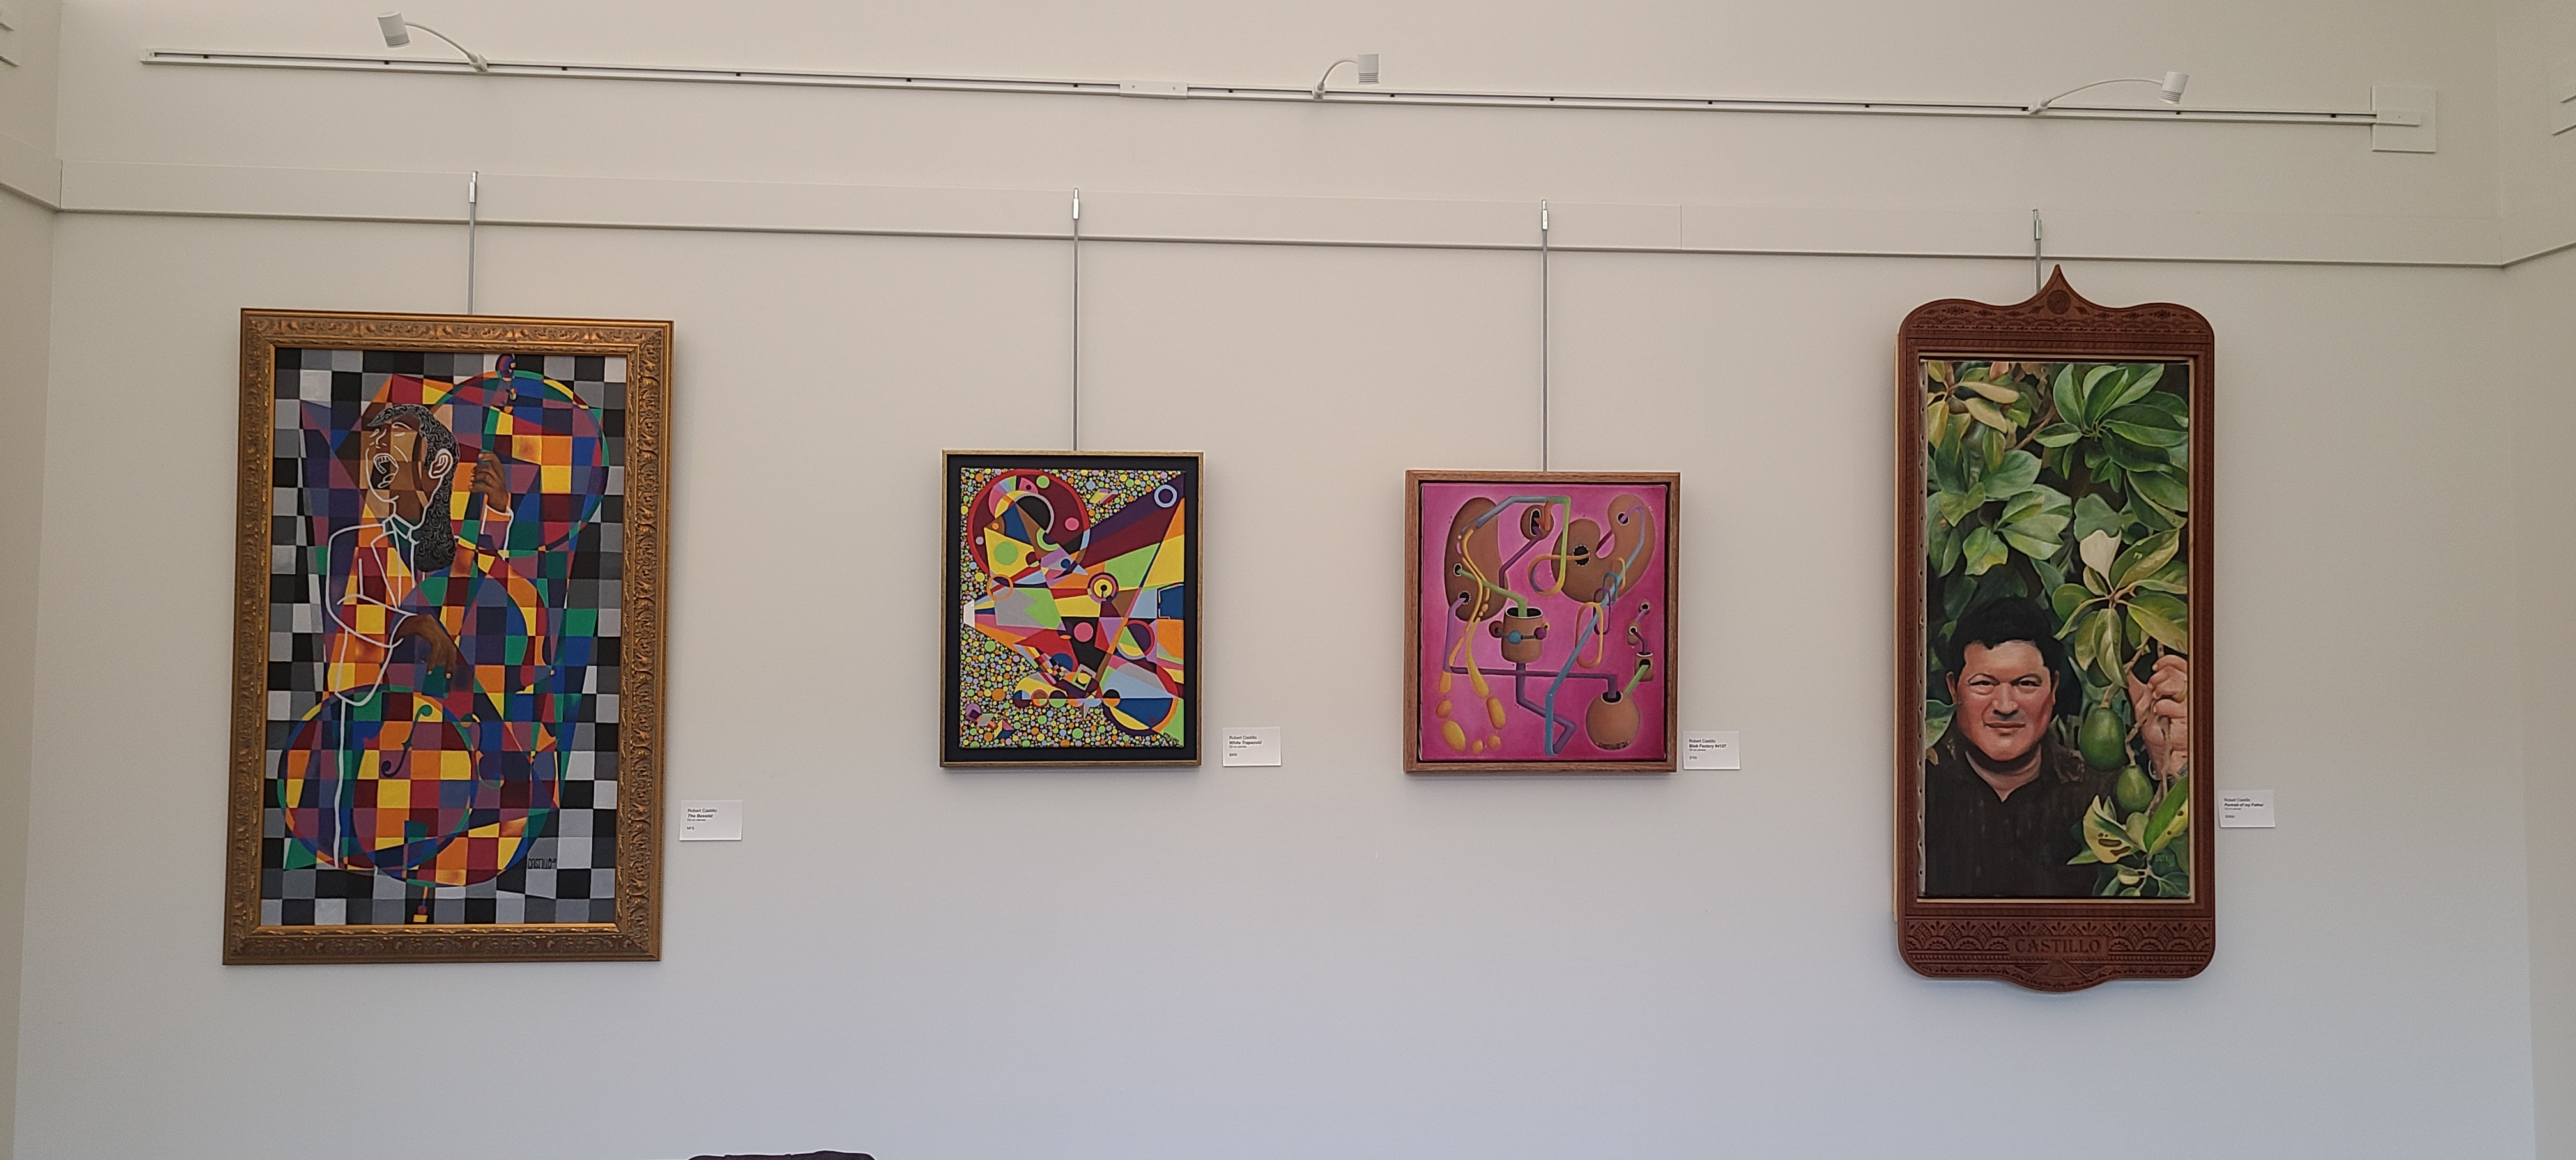 Image of art in gallery